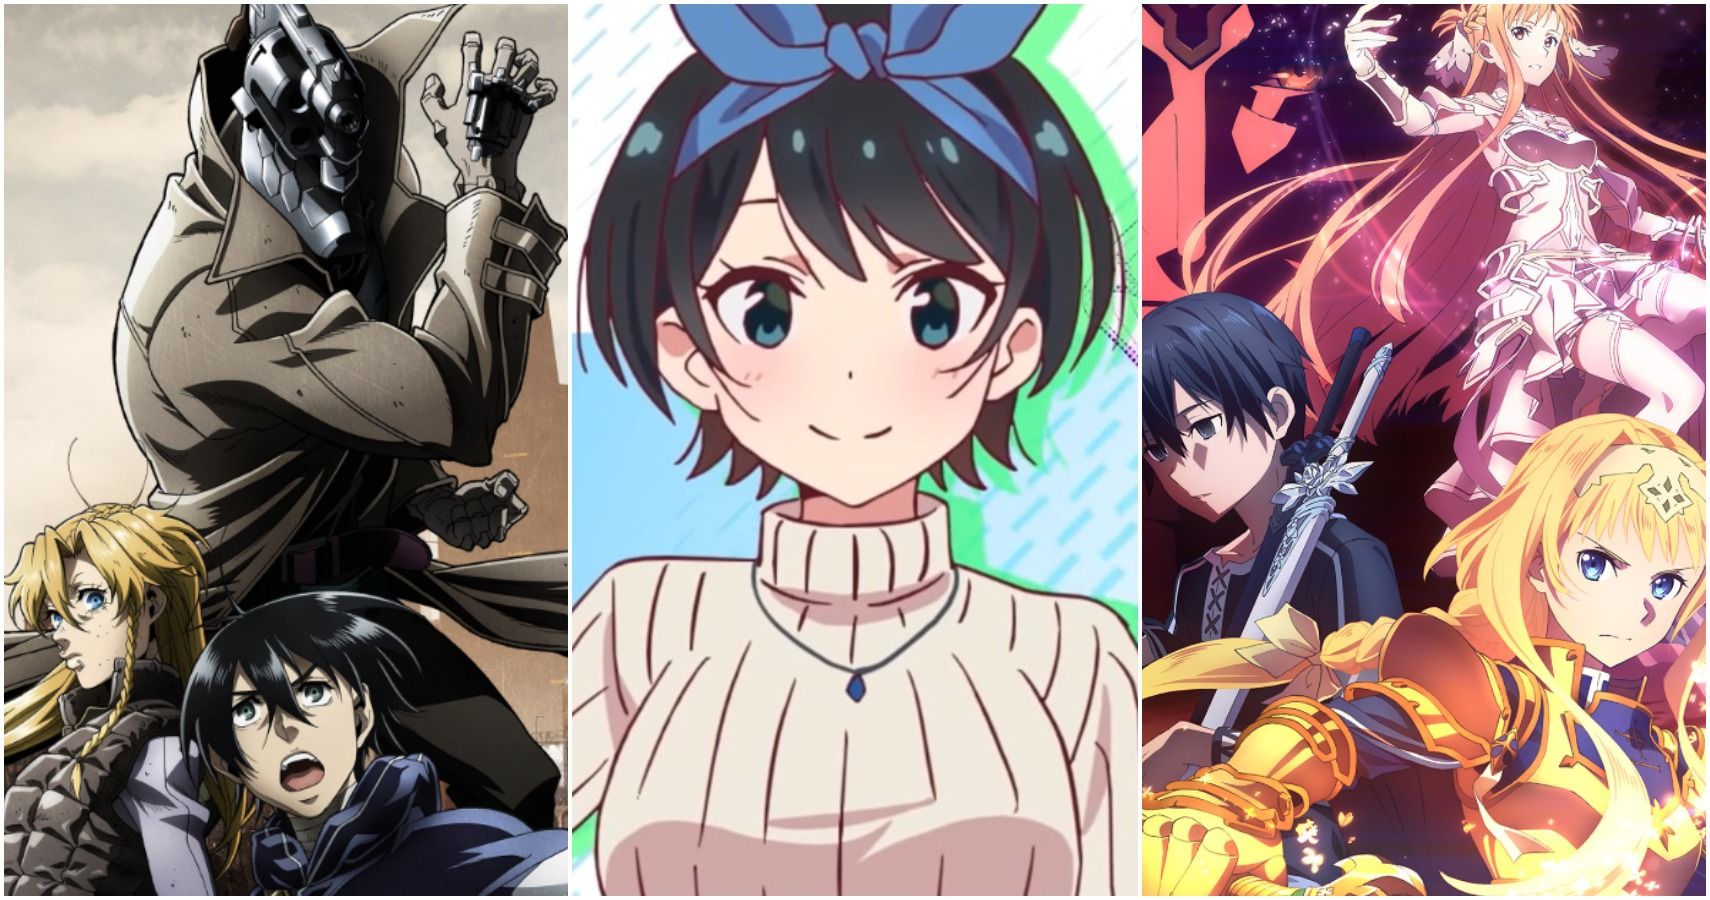 Which Summer 2020 Anime Do You Have High Expectations Of? The Latest  Seasons of SAO, Oregairu, Re:Zero, and Fire Force Were at the Top!